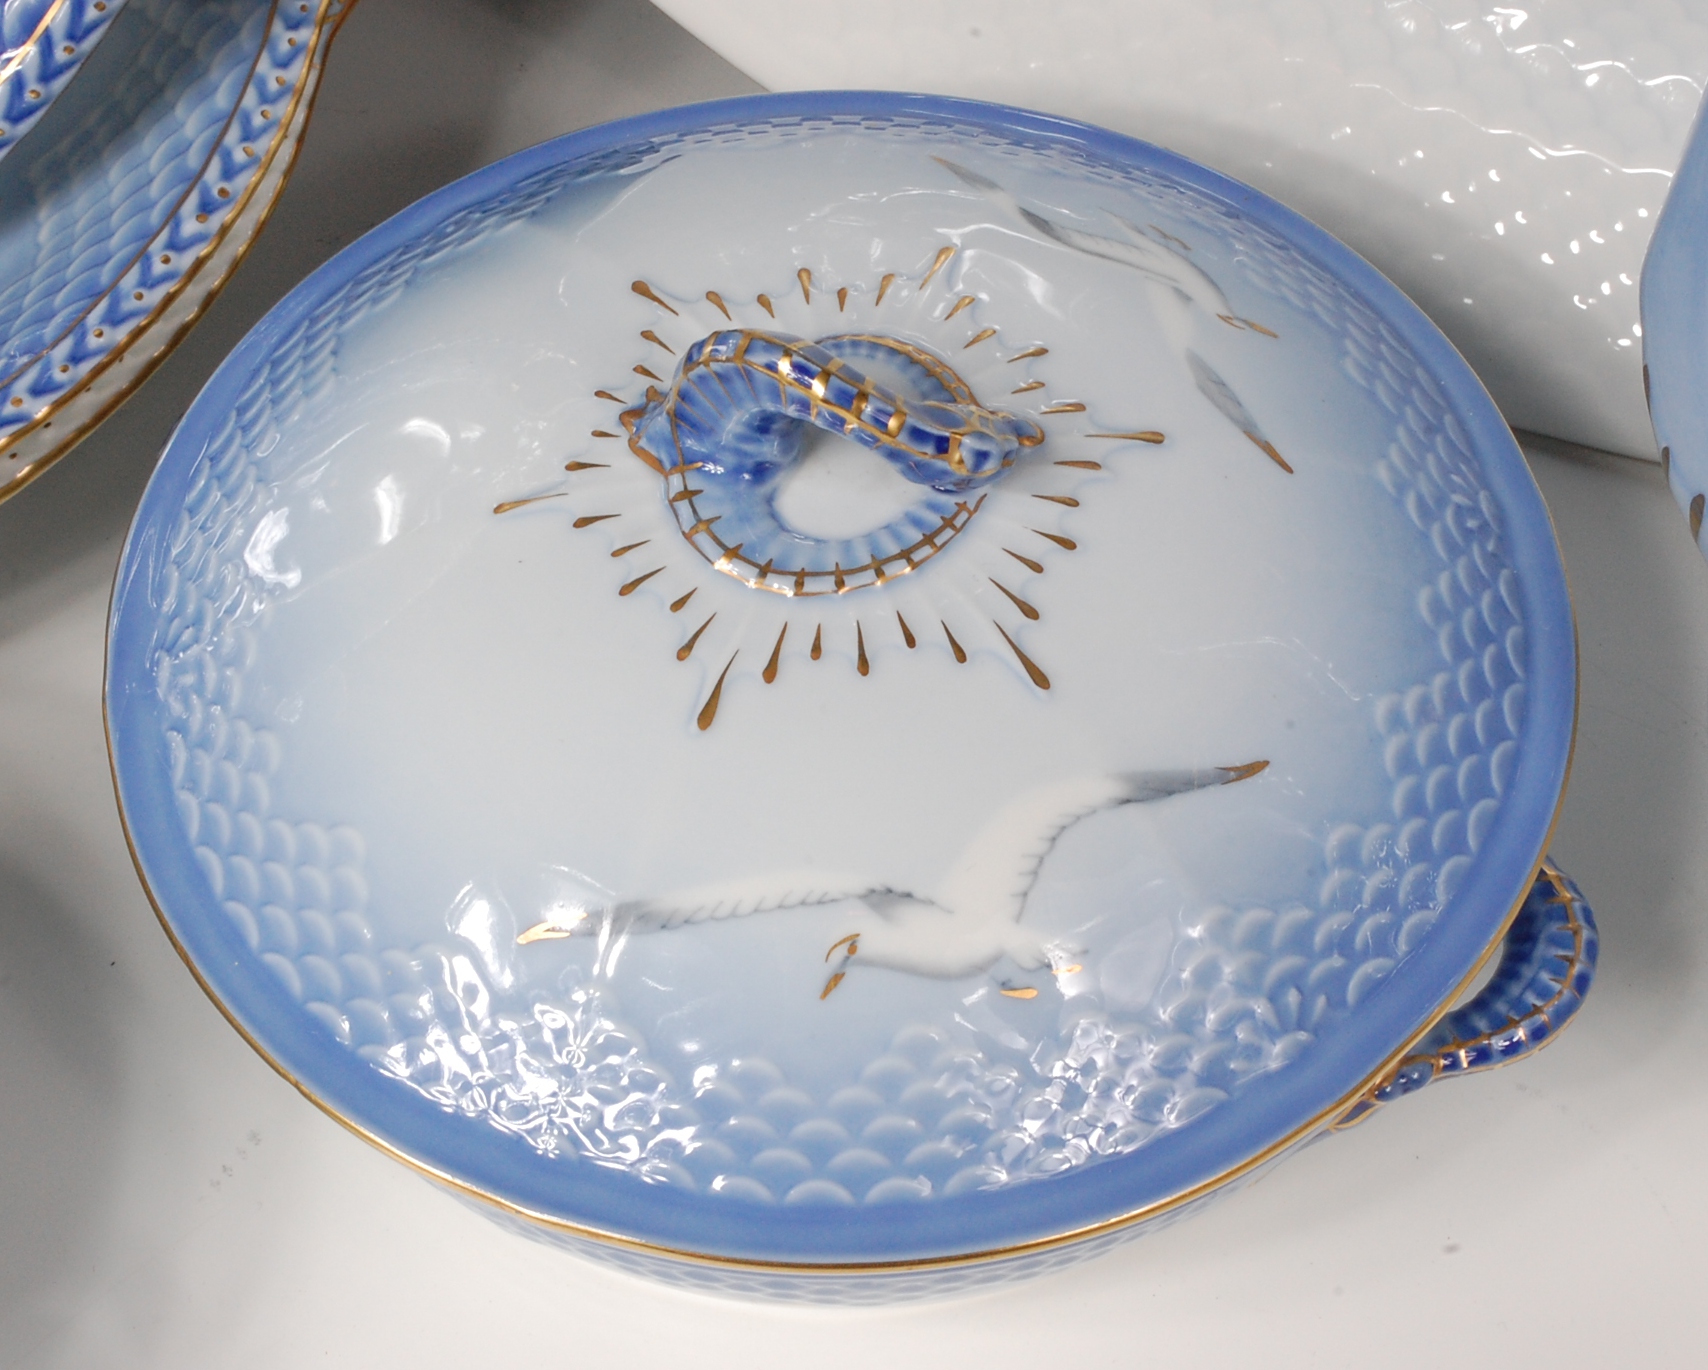 A Bing & Grondahl of Copenhagen porcelain six place setting dinner service, in the Seagull pattern, - Image 2 of 2